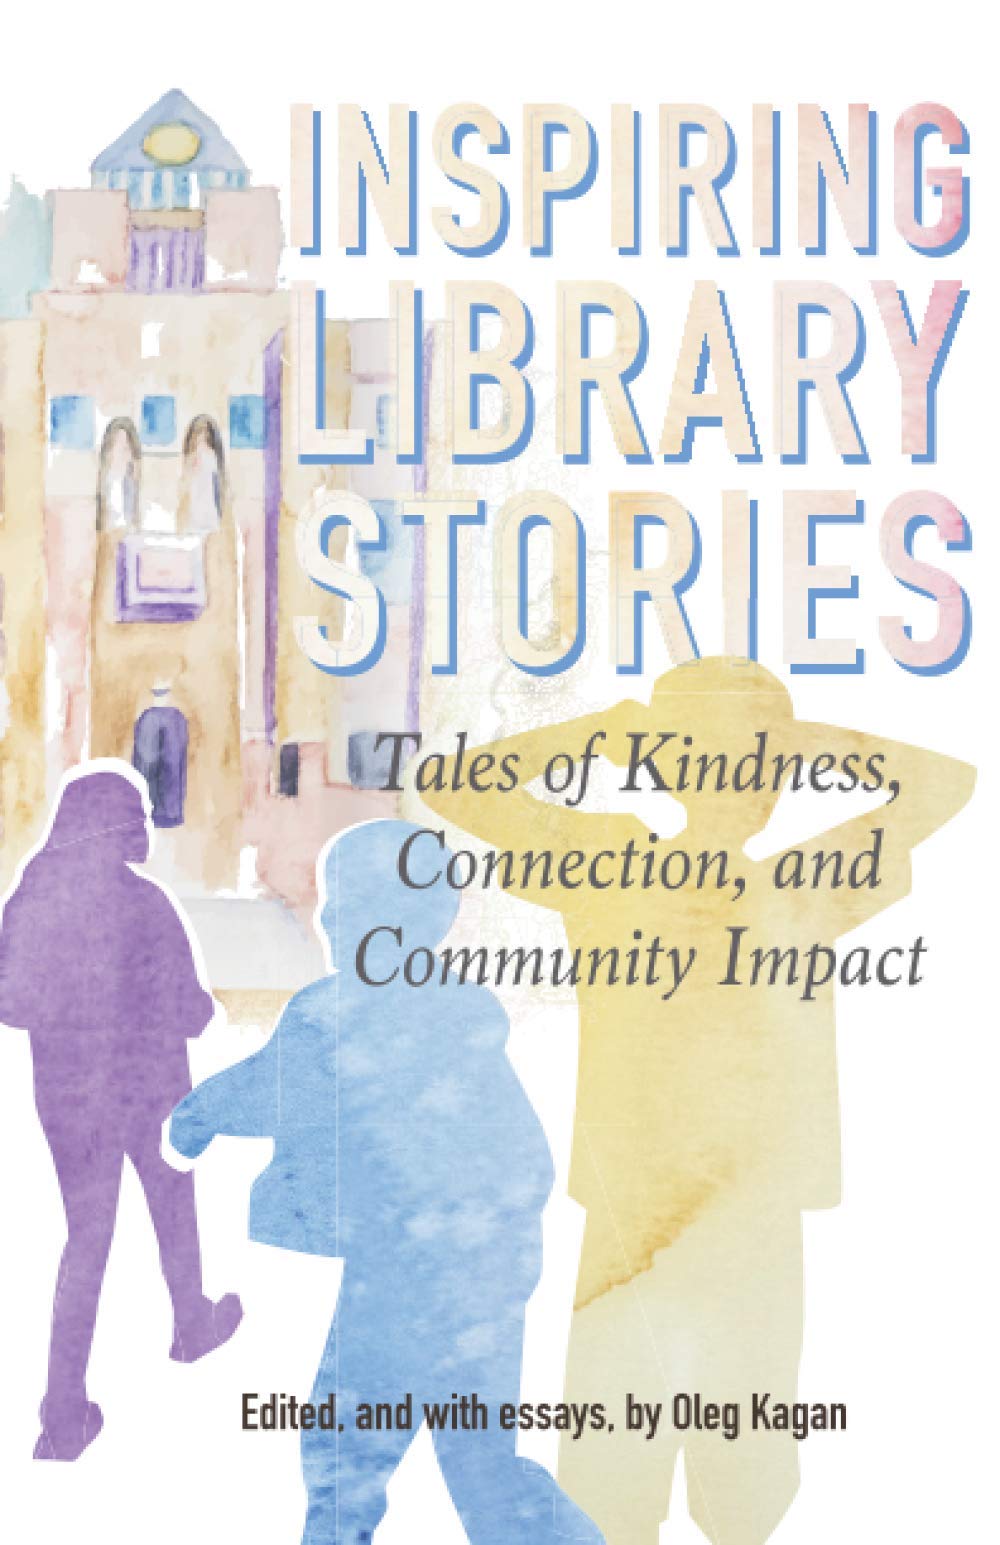 Cover of Inspiring Library Stories book. Outline of kids reading with library building in background.